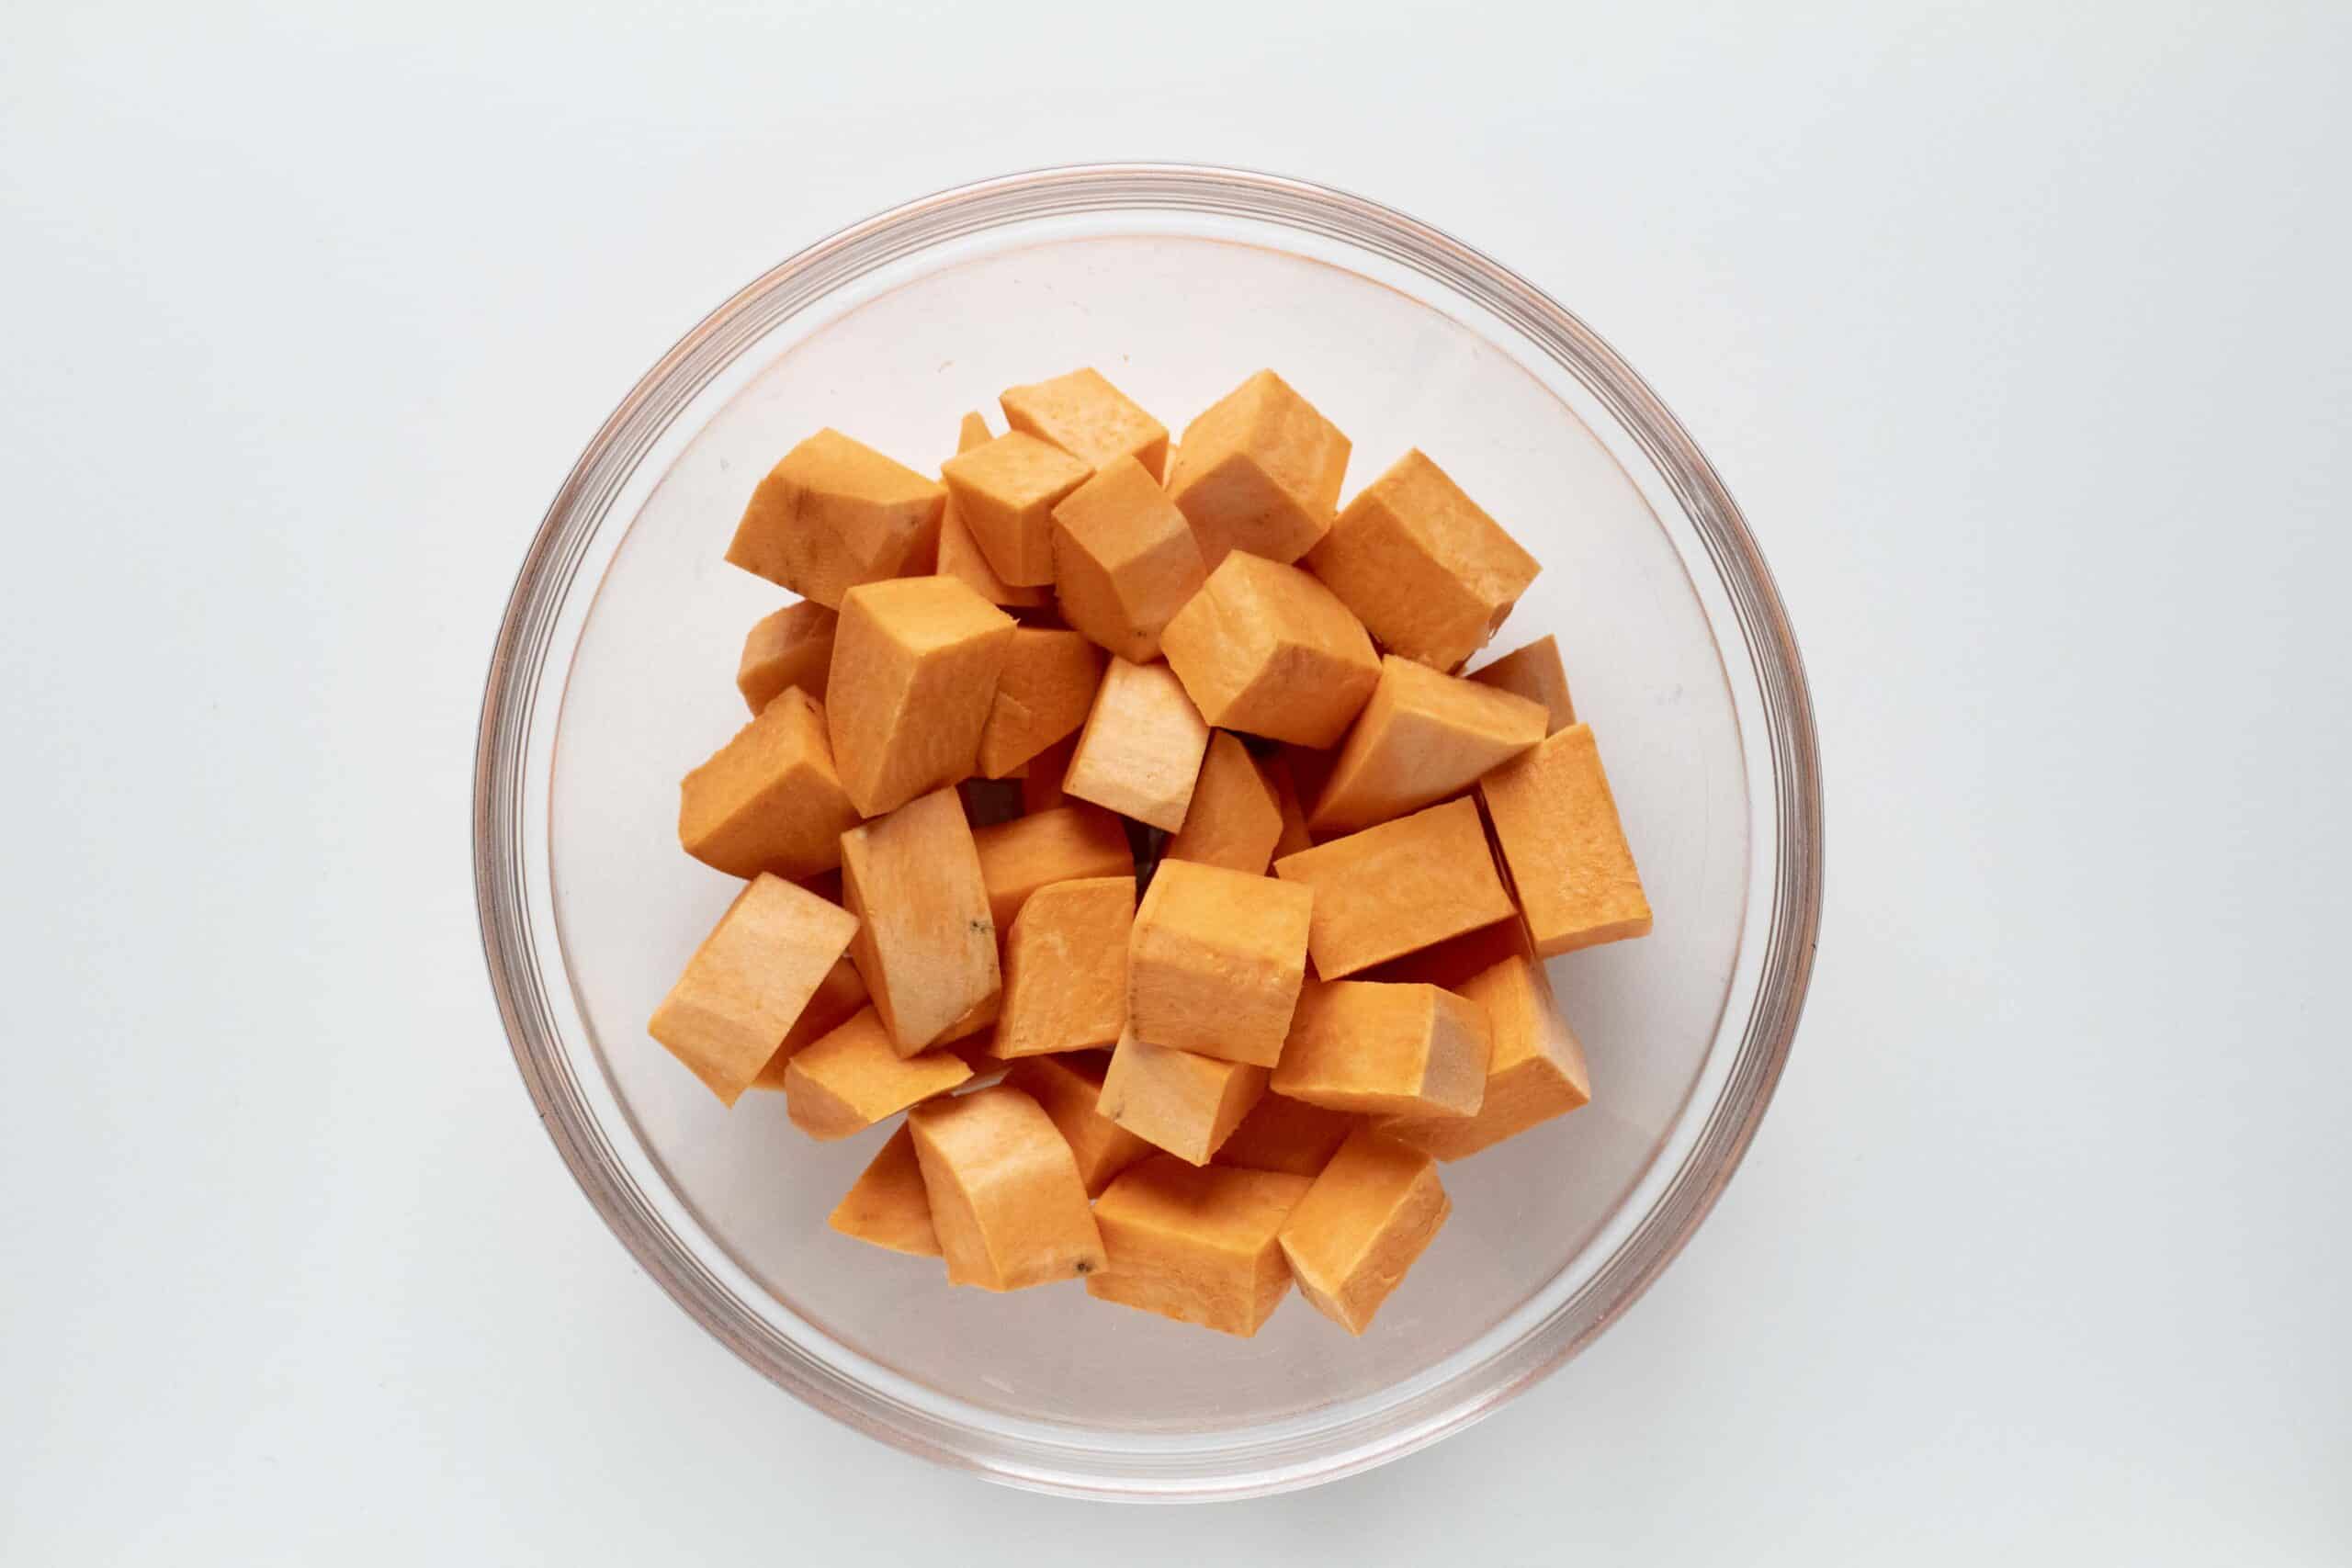 Diced sweet potatoes in a clear bowl.